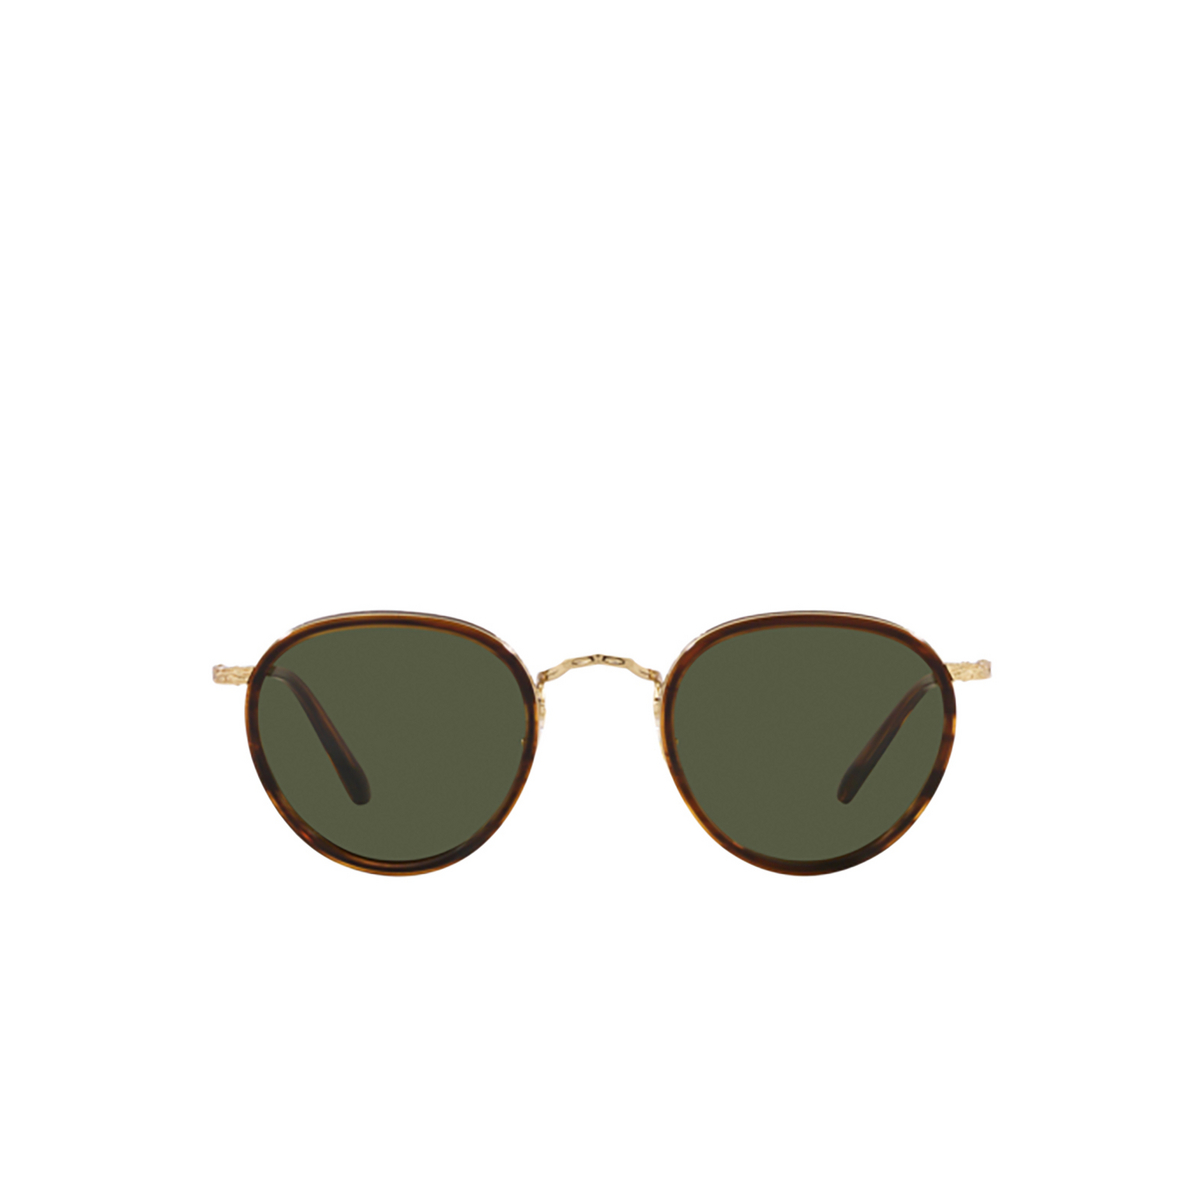 Oliver Peoples MP-2 Sunglasses 533052 Tuscany Tortoise / Gold - front view